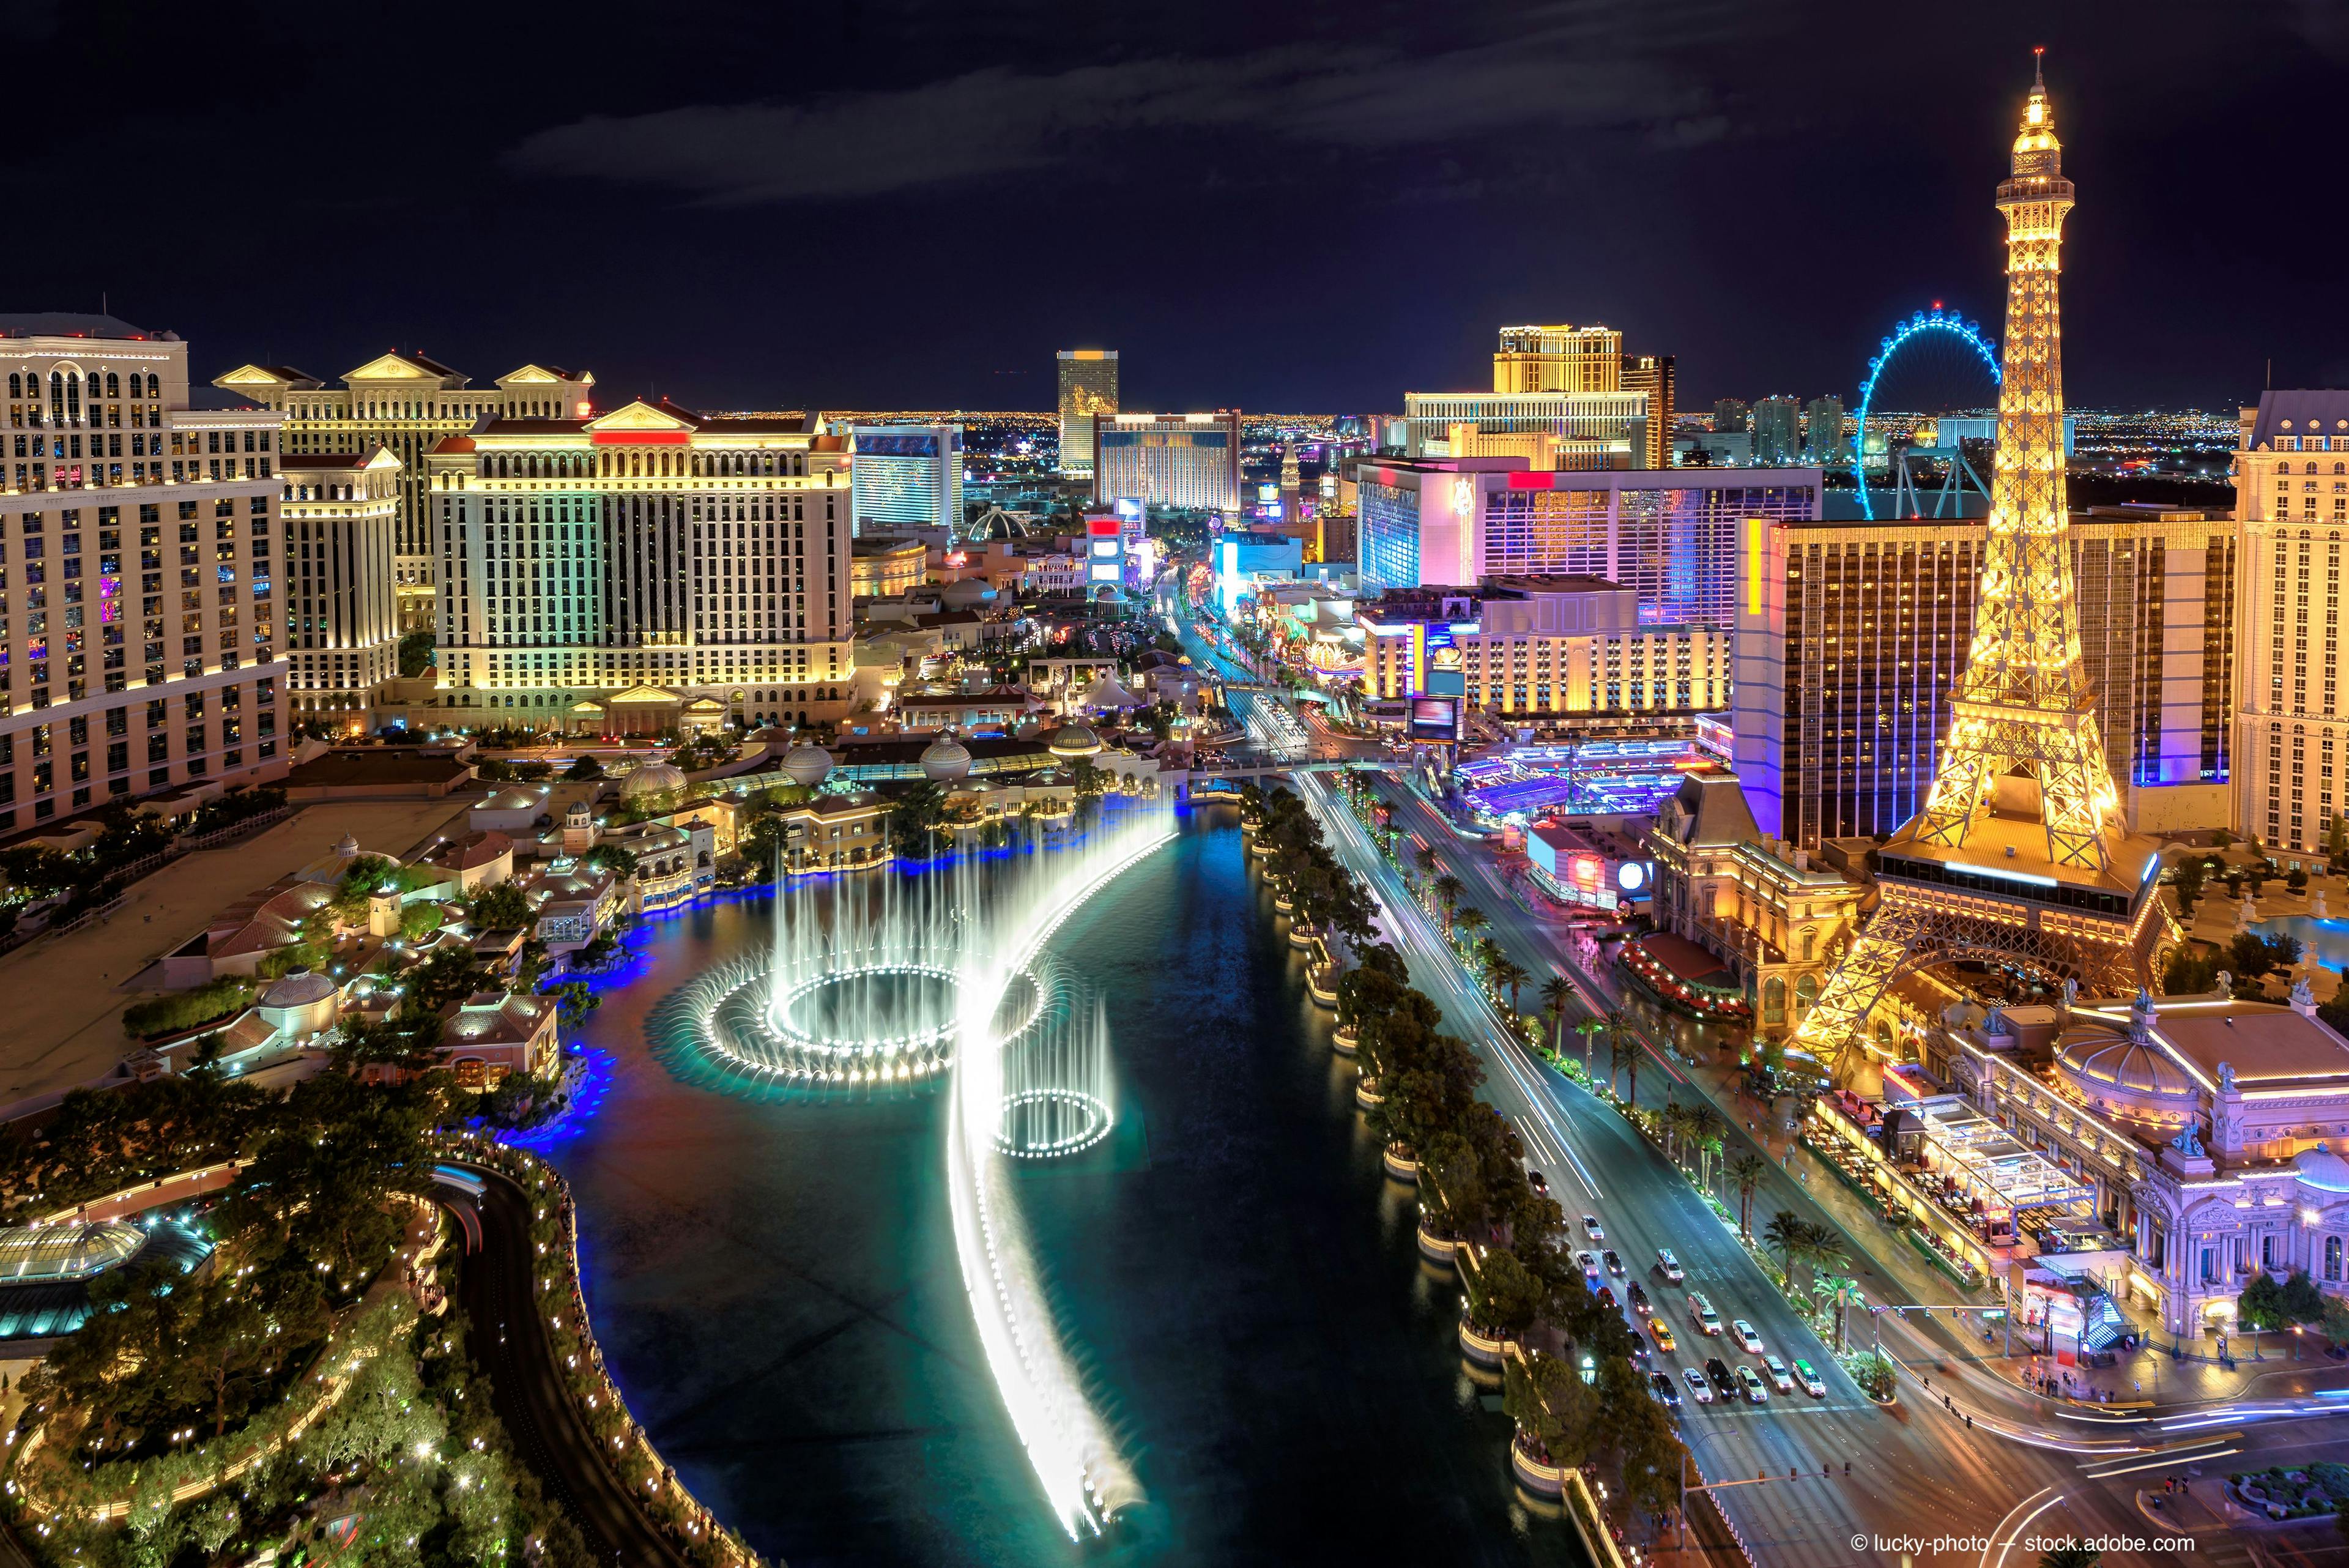 2021 ASCRS Annual Meeting moving to Las Vegas